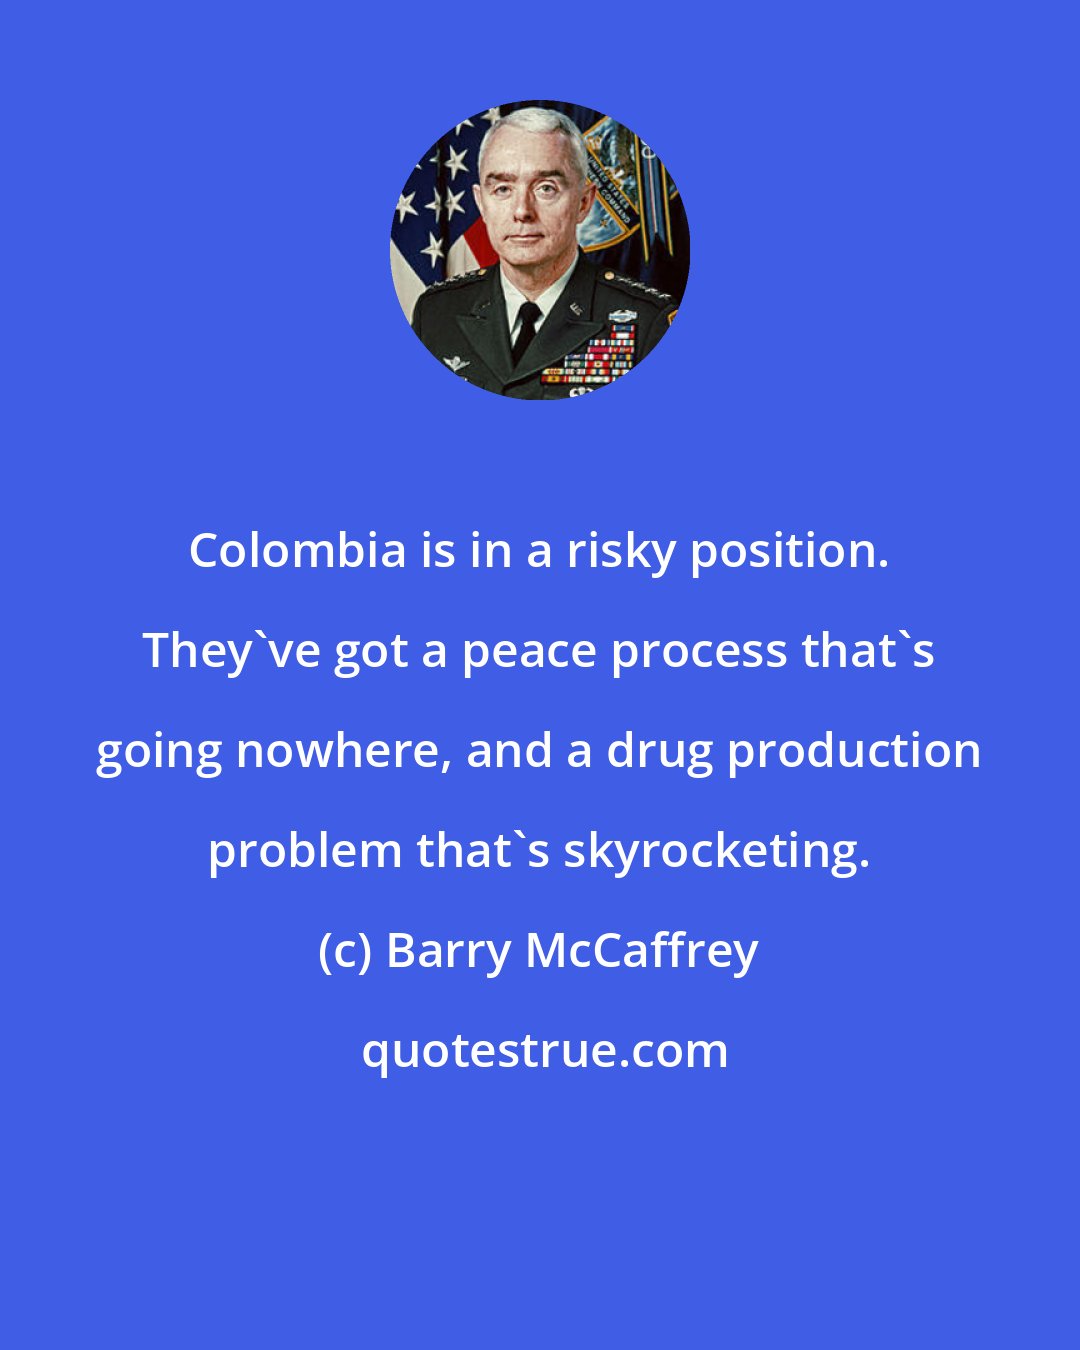 Barry McCaffrey: Colombia is in a risky position. They've got a peace process that's going nowhere, and a drug production problem that's skyrocketing.